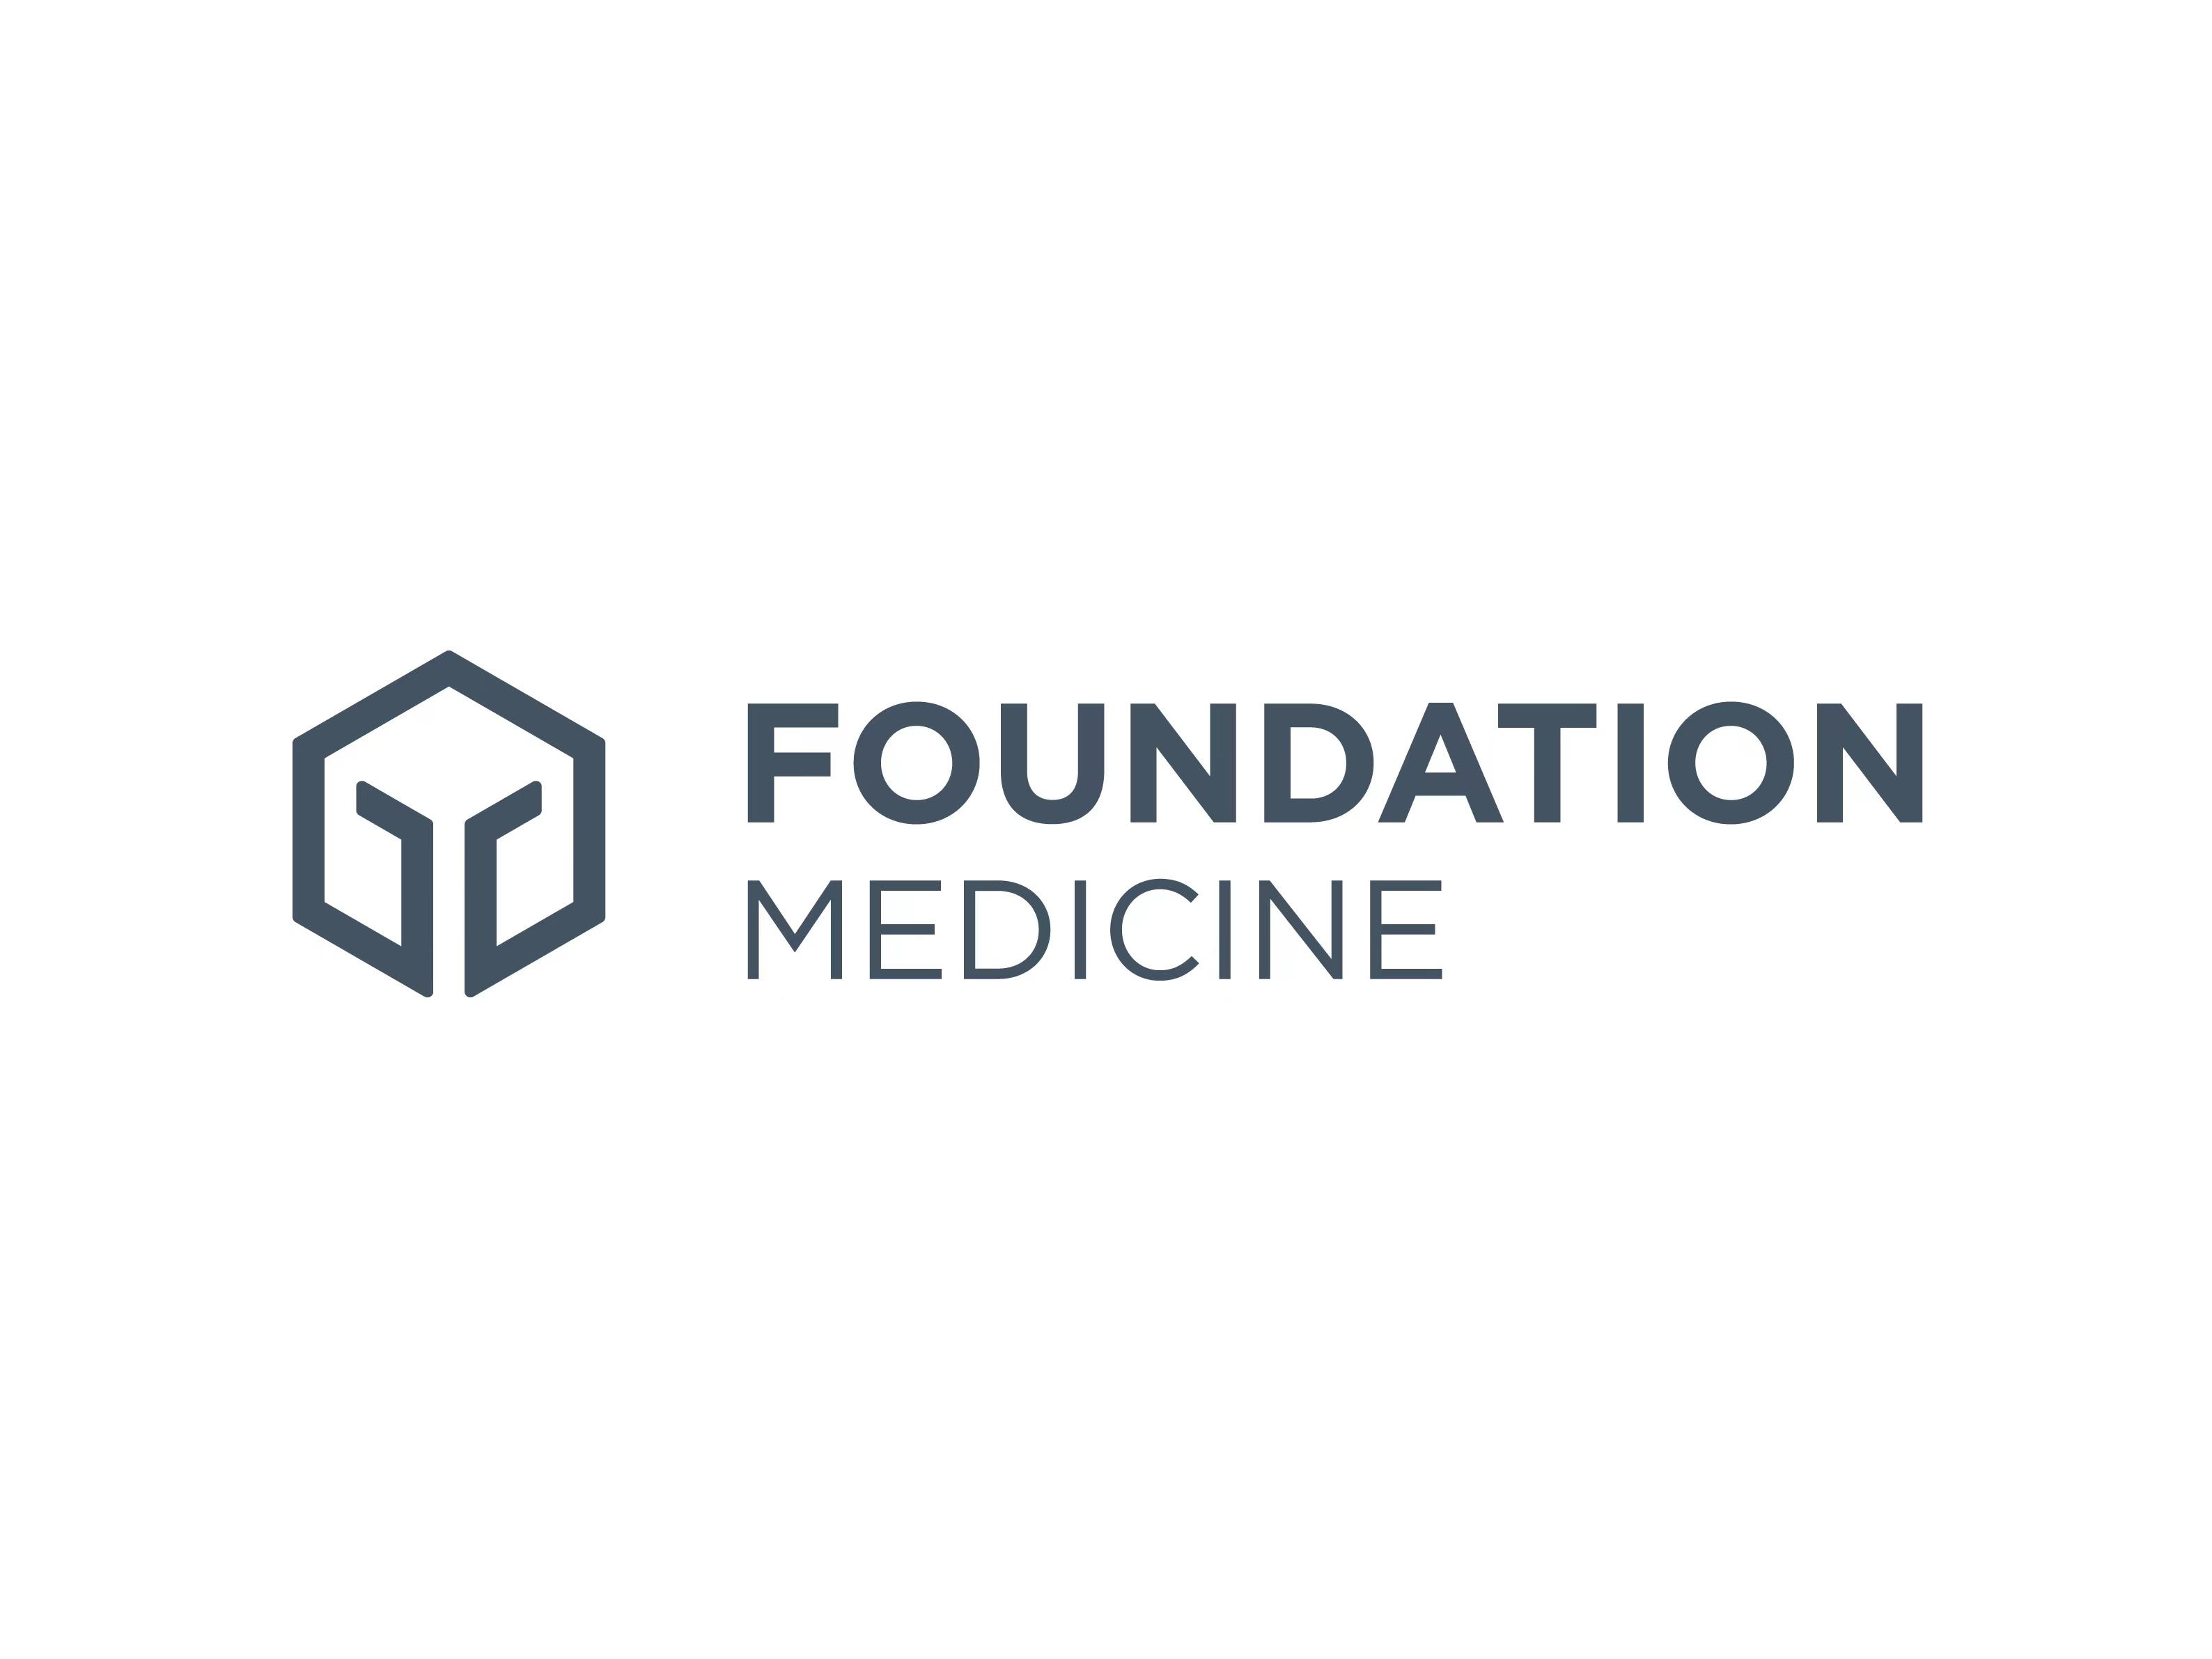 FDA Approves Foundation Medicine CDx for Use with Janssen Drug in Prostate Cancer Patients